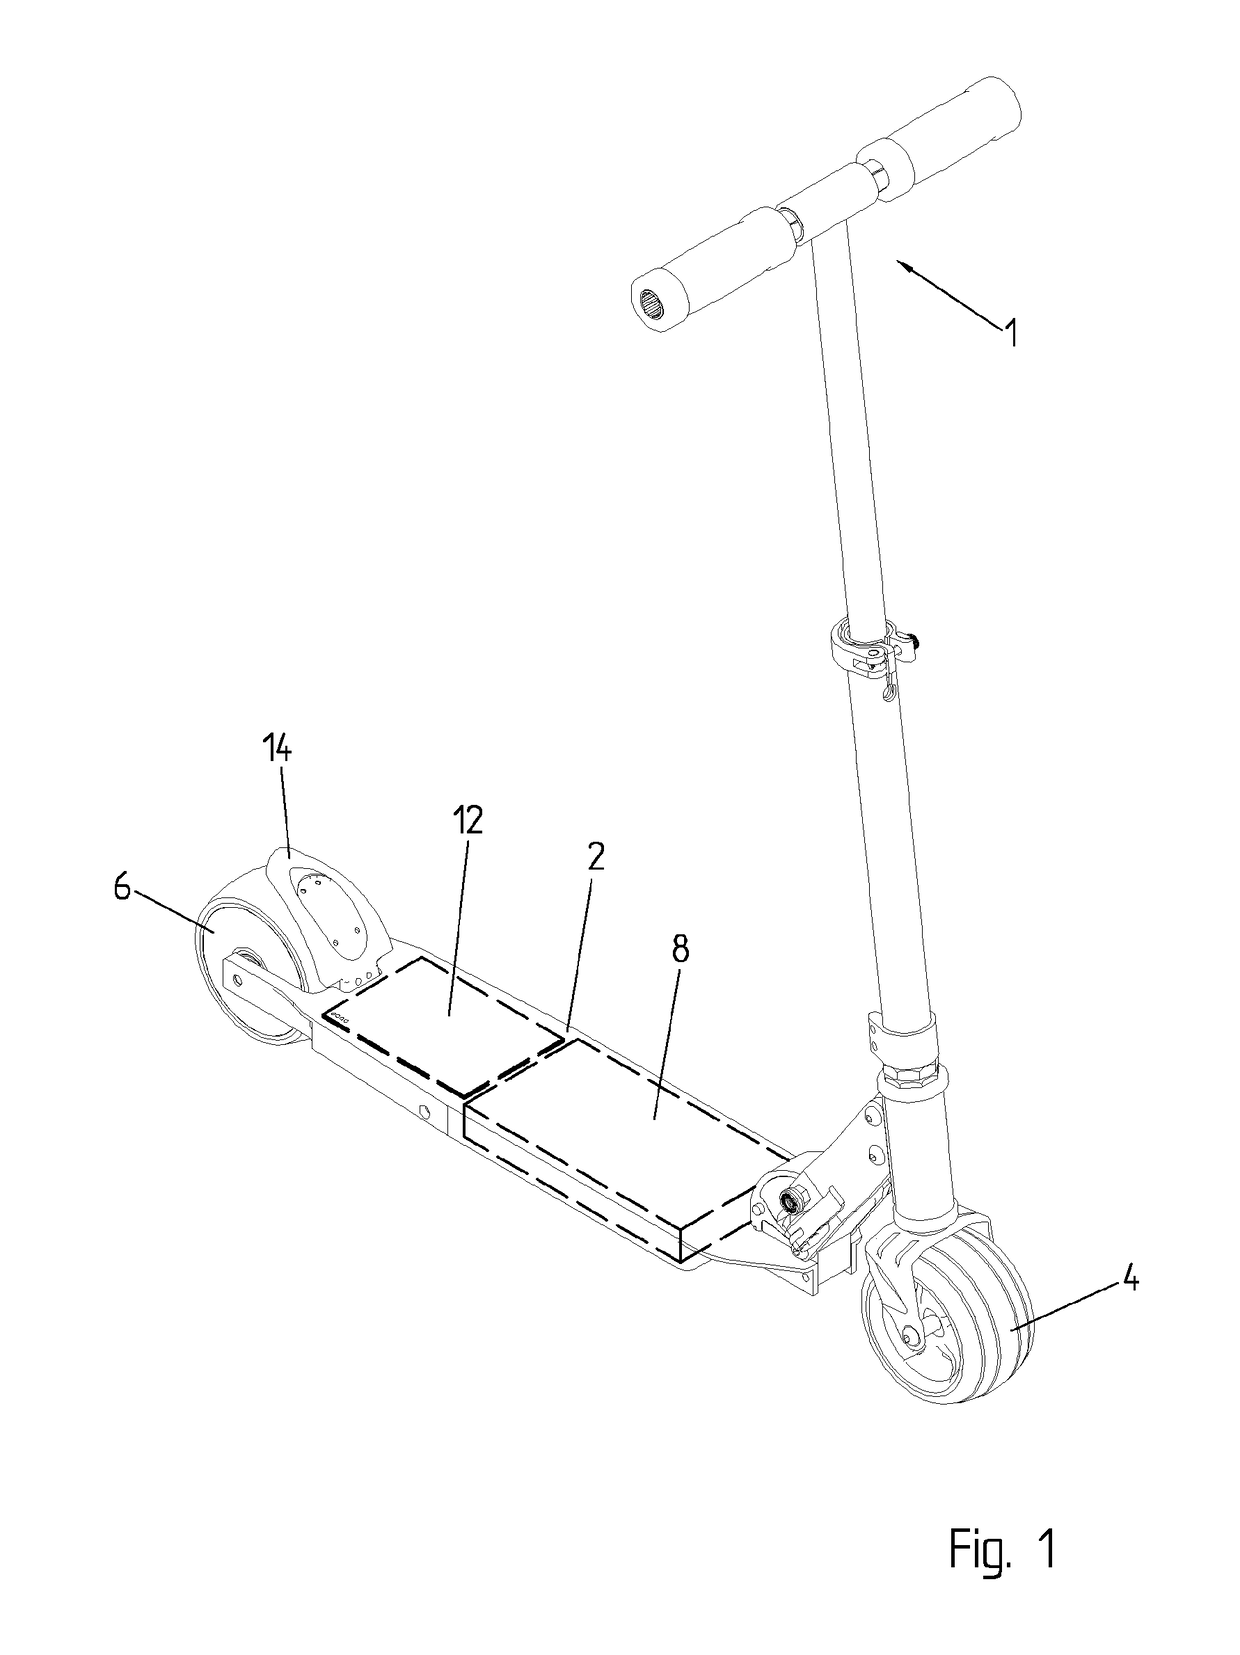 Electrically assisted street scooter